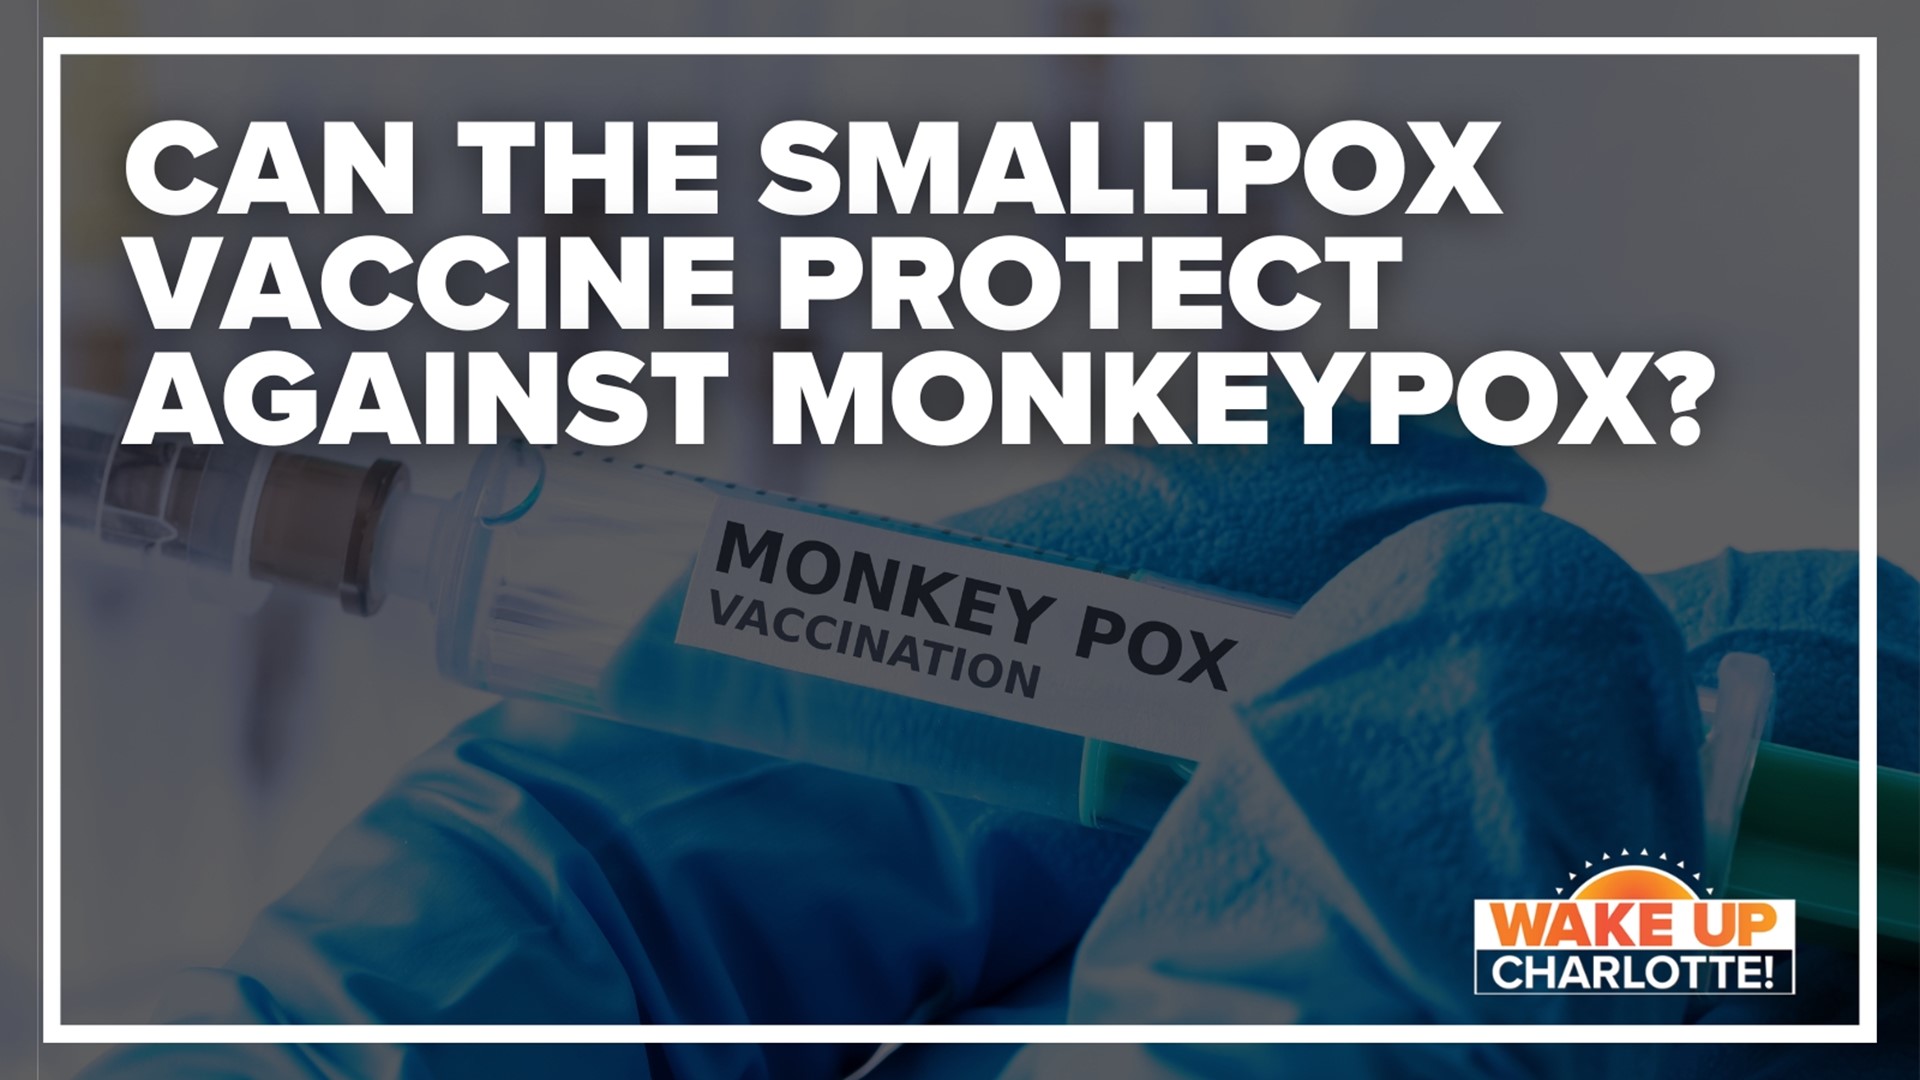 As monkeypox cases continue to climb in the Carolinas, people with smallpox vaccines are wondering if it could offer protection from monkeypox.